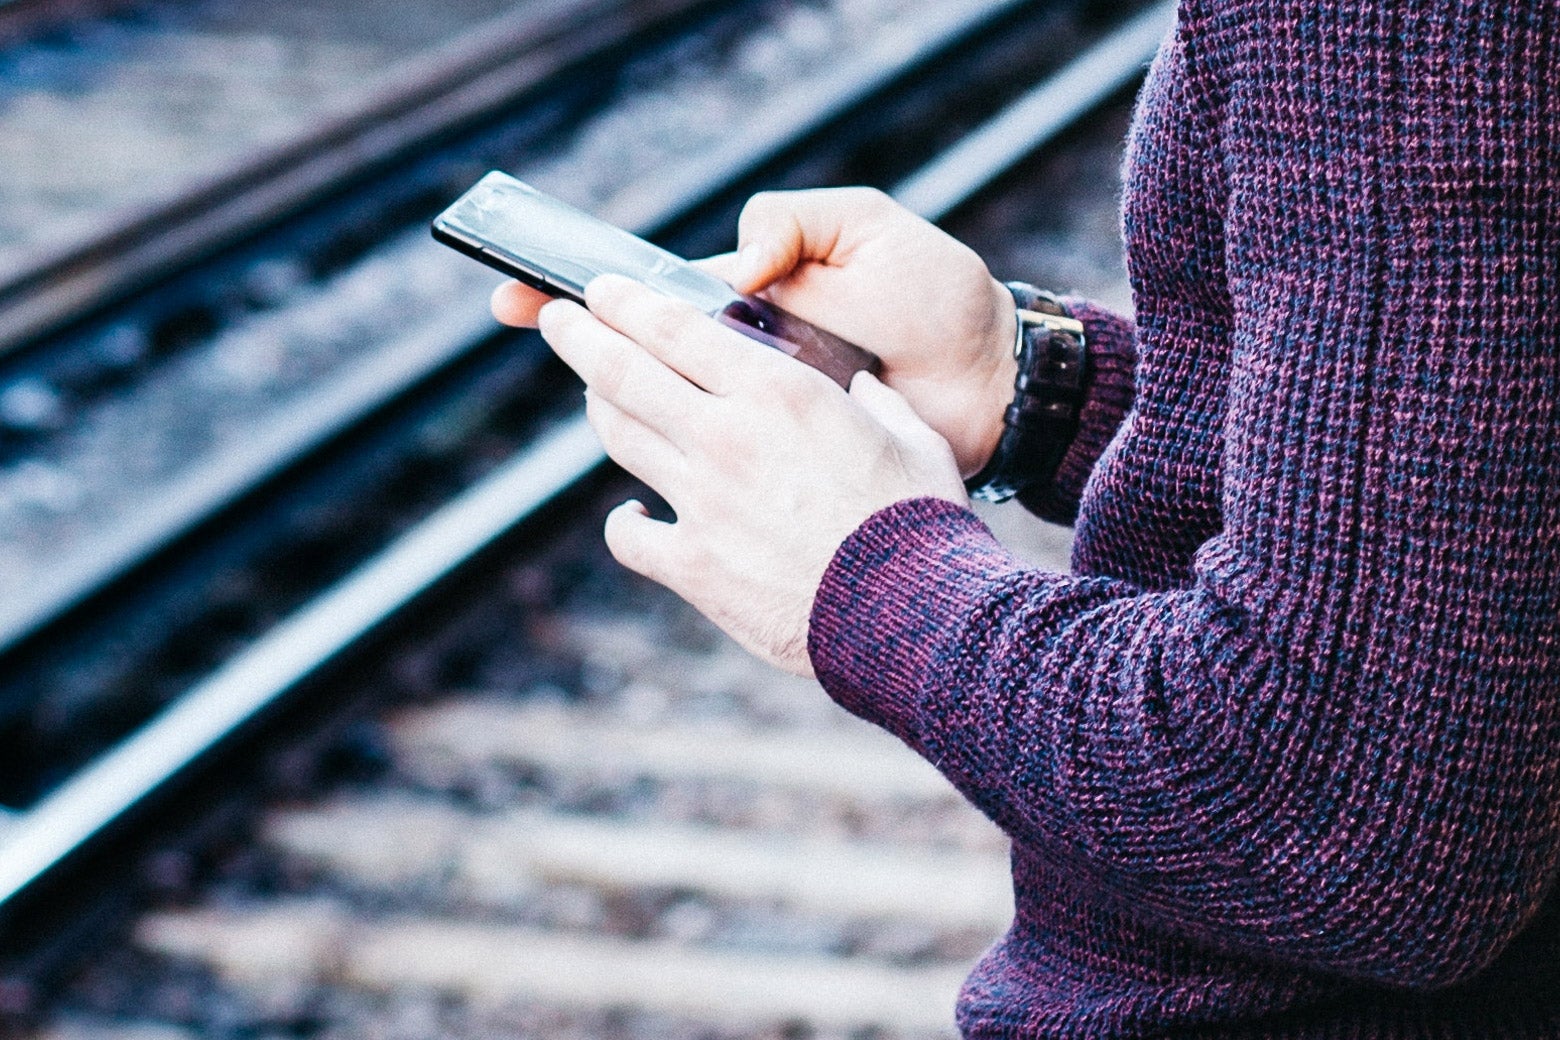 A man types on his phone while waiting for a train.